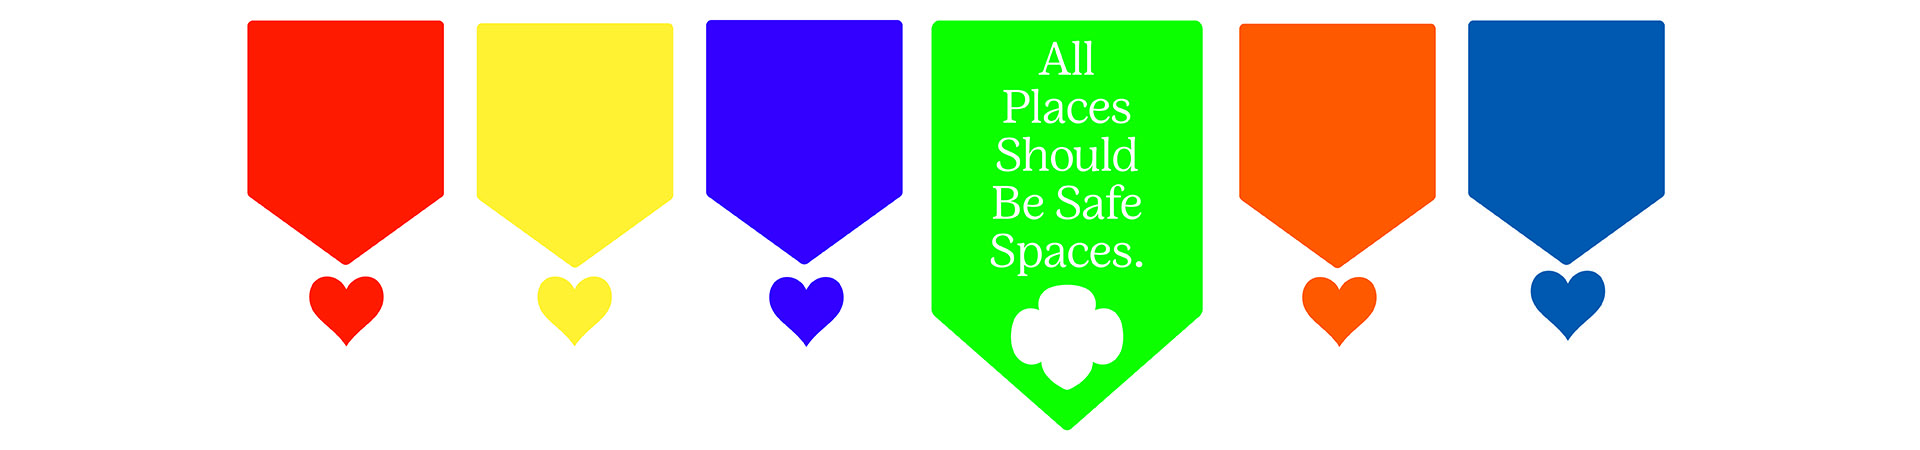  All Places Should Be Safe Spaces 